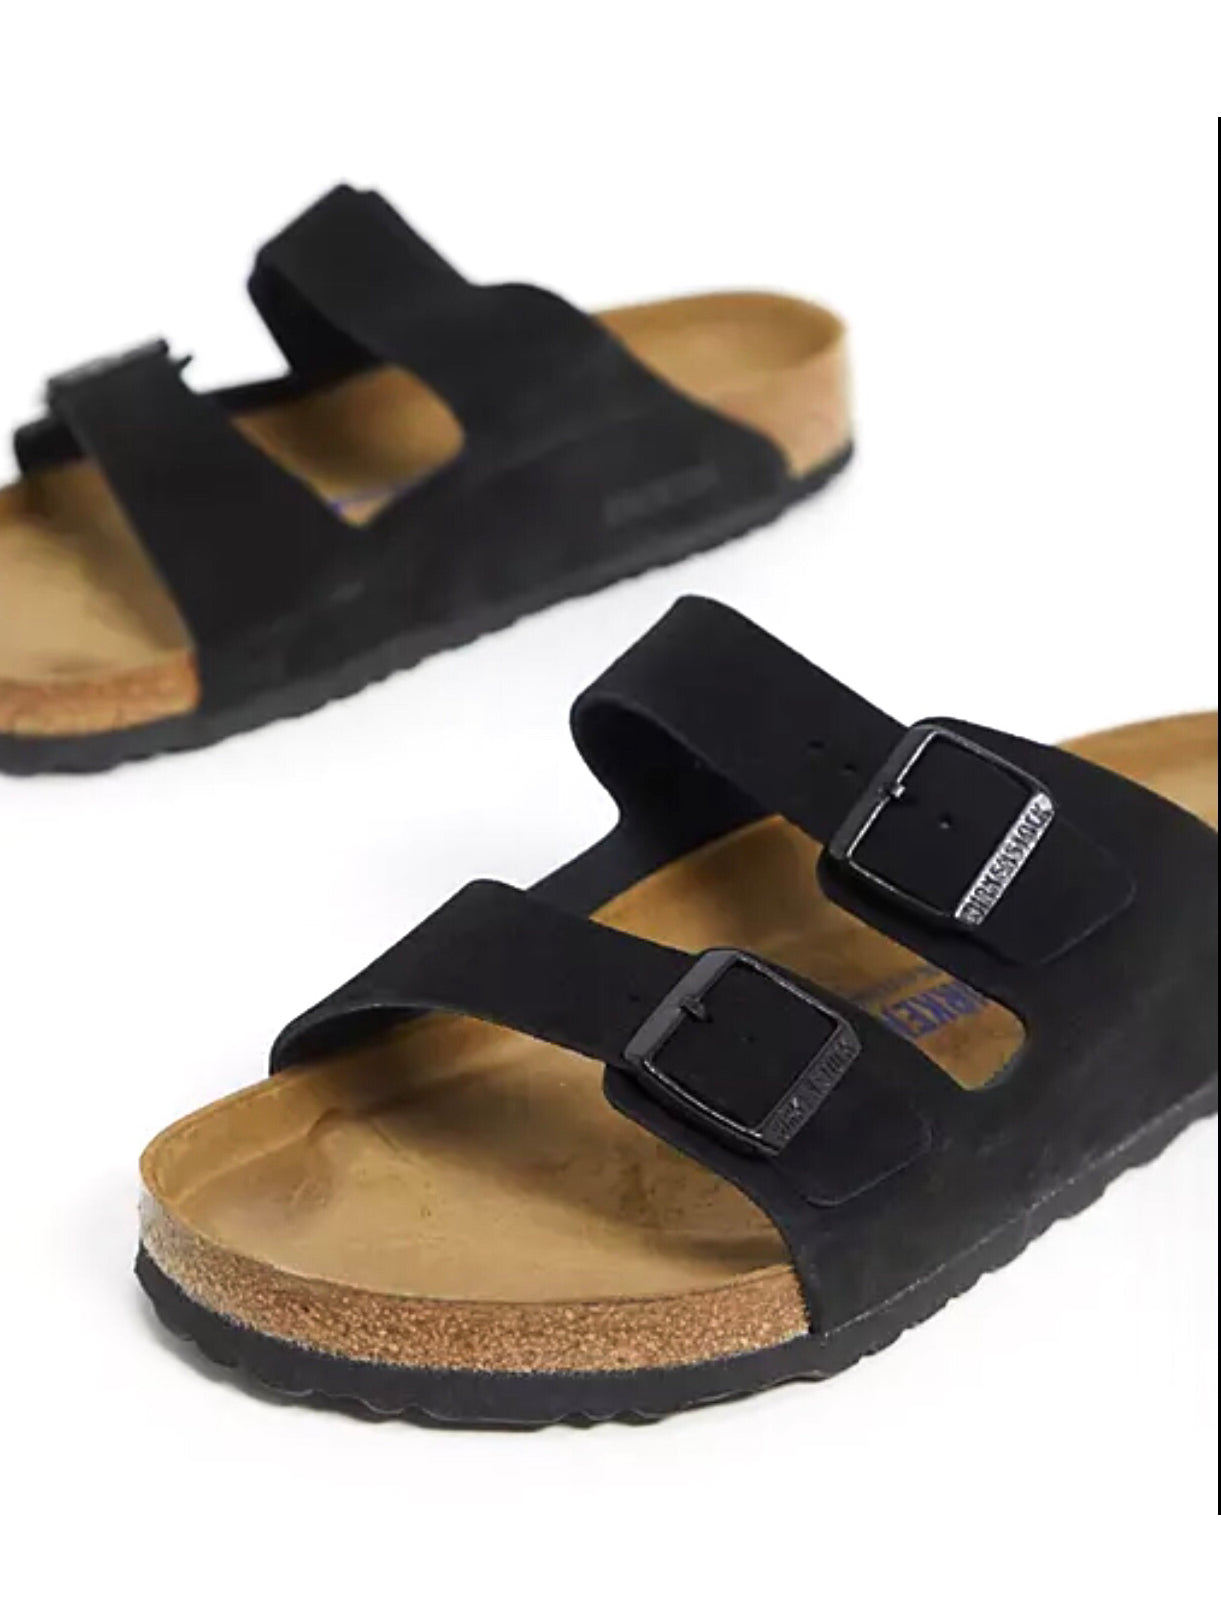 Birkenstock Arizona Black Suede Leather Soft Footbed Made In Germany